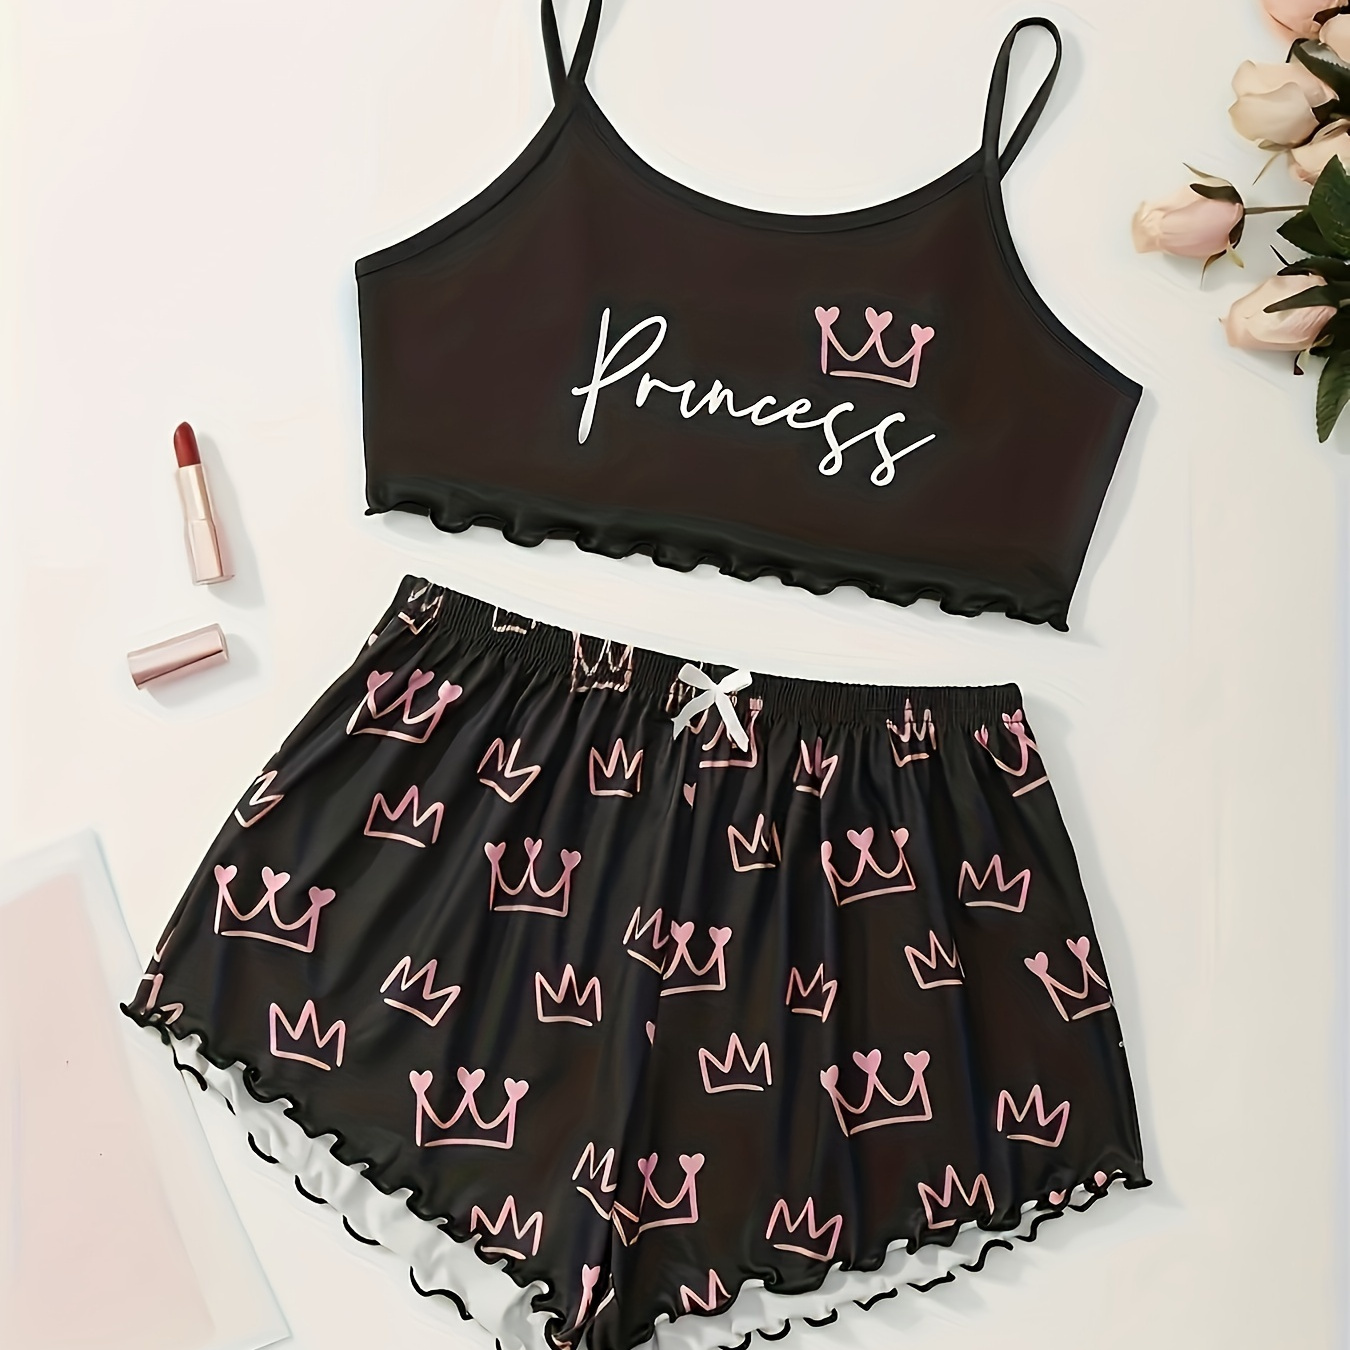 

Women's Crown & Letter Print Frill Trim Sexy Pajama Set, Round Neck Backless Crop Cami Top & Shorts, Comfortable Relaxed Fit, Summer Nightwear